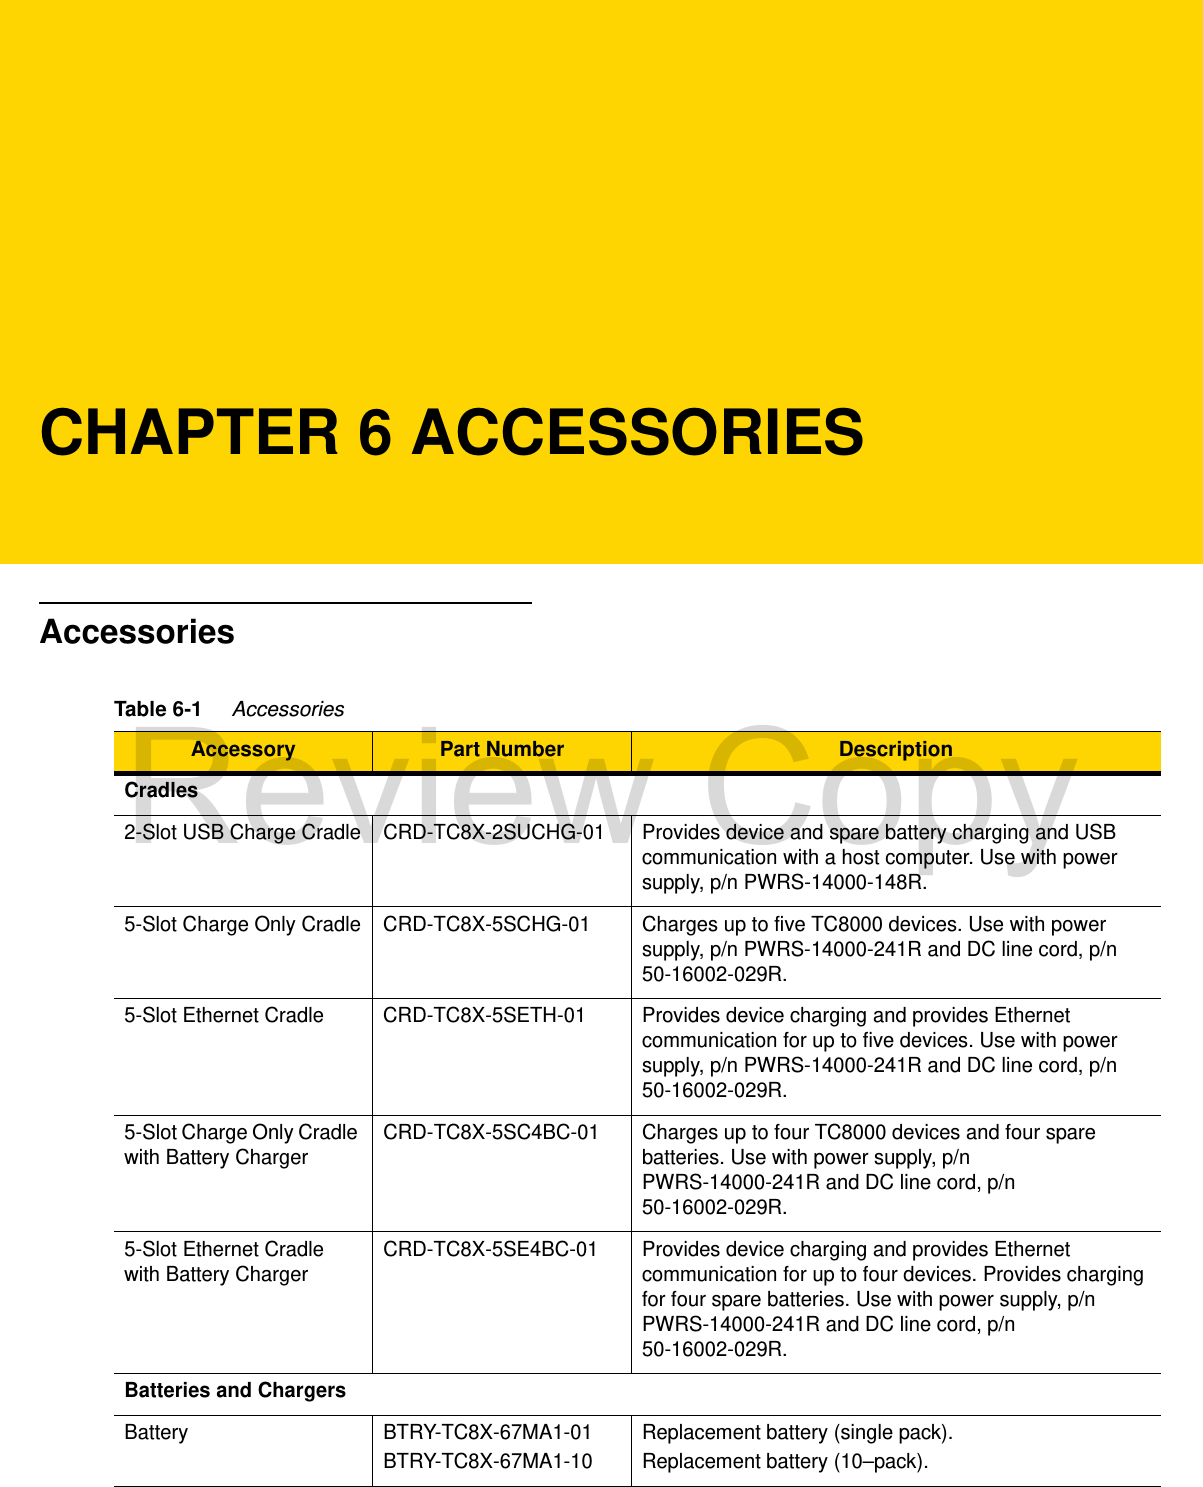 CHAPTER 6 ACCESSORIESAccessoriesTable 6-1     AccessoriesAccessory Part Number DescriptionCradles2-Slot USB Charge Cradle CRD-TC8X-2SUCHG-01 Provides device and spare battery charging and USB communication with a host computer. Use with power supply, p/n PWRS-14000-148R.5-Slot Charge Only Cradle CRD-TC8X-5SCHG-01 Charges up to five TC8000 devices. Use with power supply, p/n PWRS-14000-241R and DC line cord, p/n 50-16002-029R.5-Slot Ethernet Cradle CRD-TC8X-5SETH-01 Provides device charging and provides Ethernet communication for up to five devices. Use with power supply, p/n PWRS-14000-241R and DC line cord, p/n 50-16002-029R.5-Slot Charge Only Cradle with Battery Charger CRD-TC8X-5SC4BC-01 Charges up to four TC8000 devices and four spare batteries. Use with power supply, p/n PWRS-14000-241R and DC line cord, p/n 50-16002-029R.5-Slot Ethernet Cradle with Battery Charger CRD-TC8X-5SE4BC-01 Provides device charging and provides Ethernet communication for up to four devices. Provides charging for four spare batteries. Use with power supply, p/n PWRS-14000-241R and DC line cord, p/n 50-16002-029R.Batteries and ChargersBattery BTRY-TC8X-67MA1-01BTRY-TC8X-67MA1-10Replacement battery (single pack).Replacement battery (10–pack).Review Copy